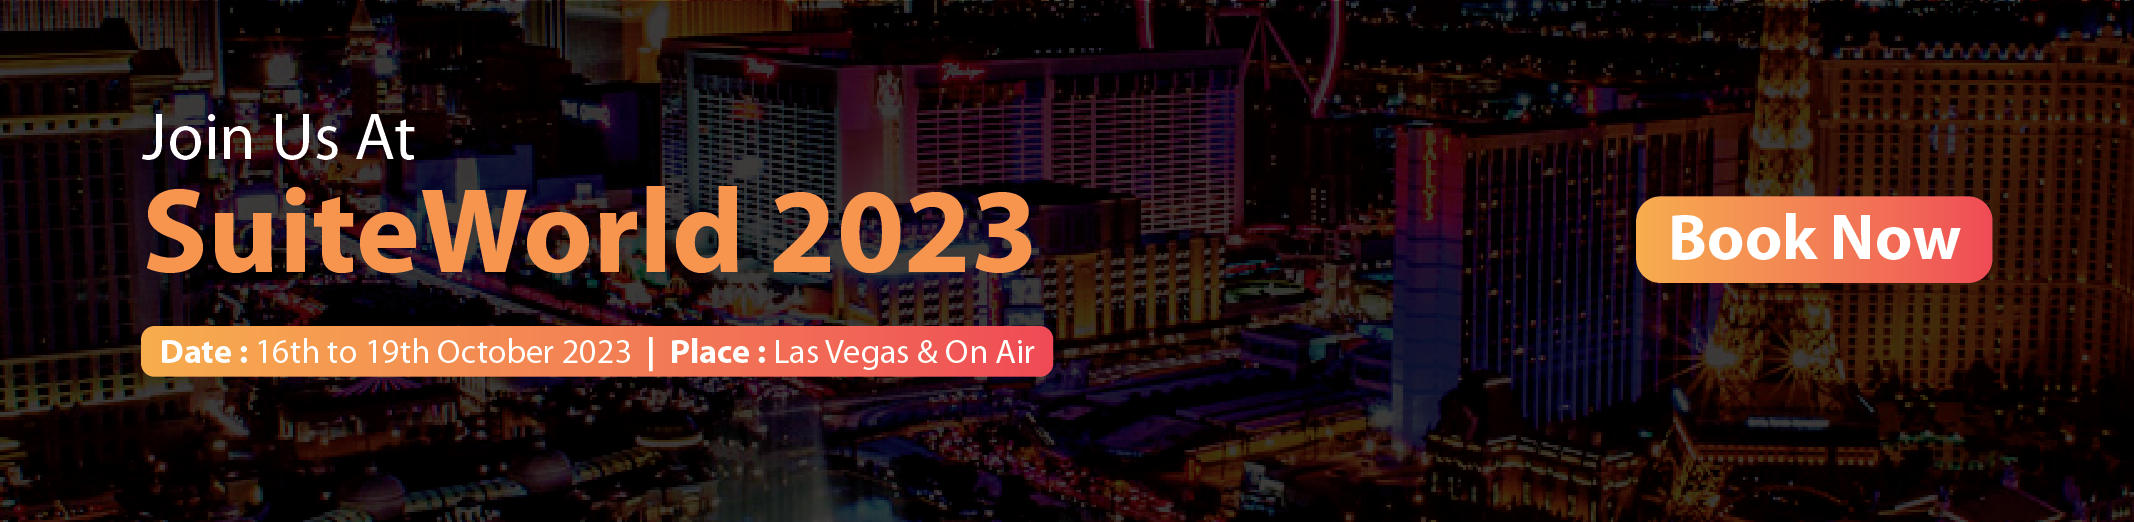 Join us At NetSuite SuiteWorld 2023